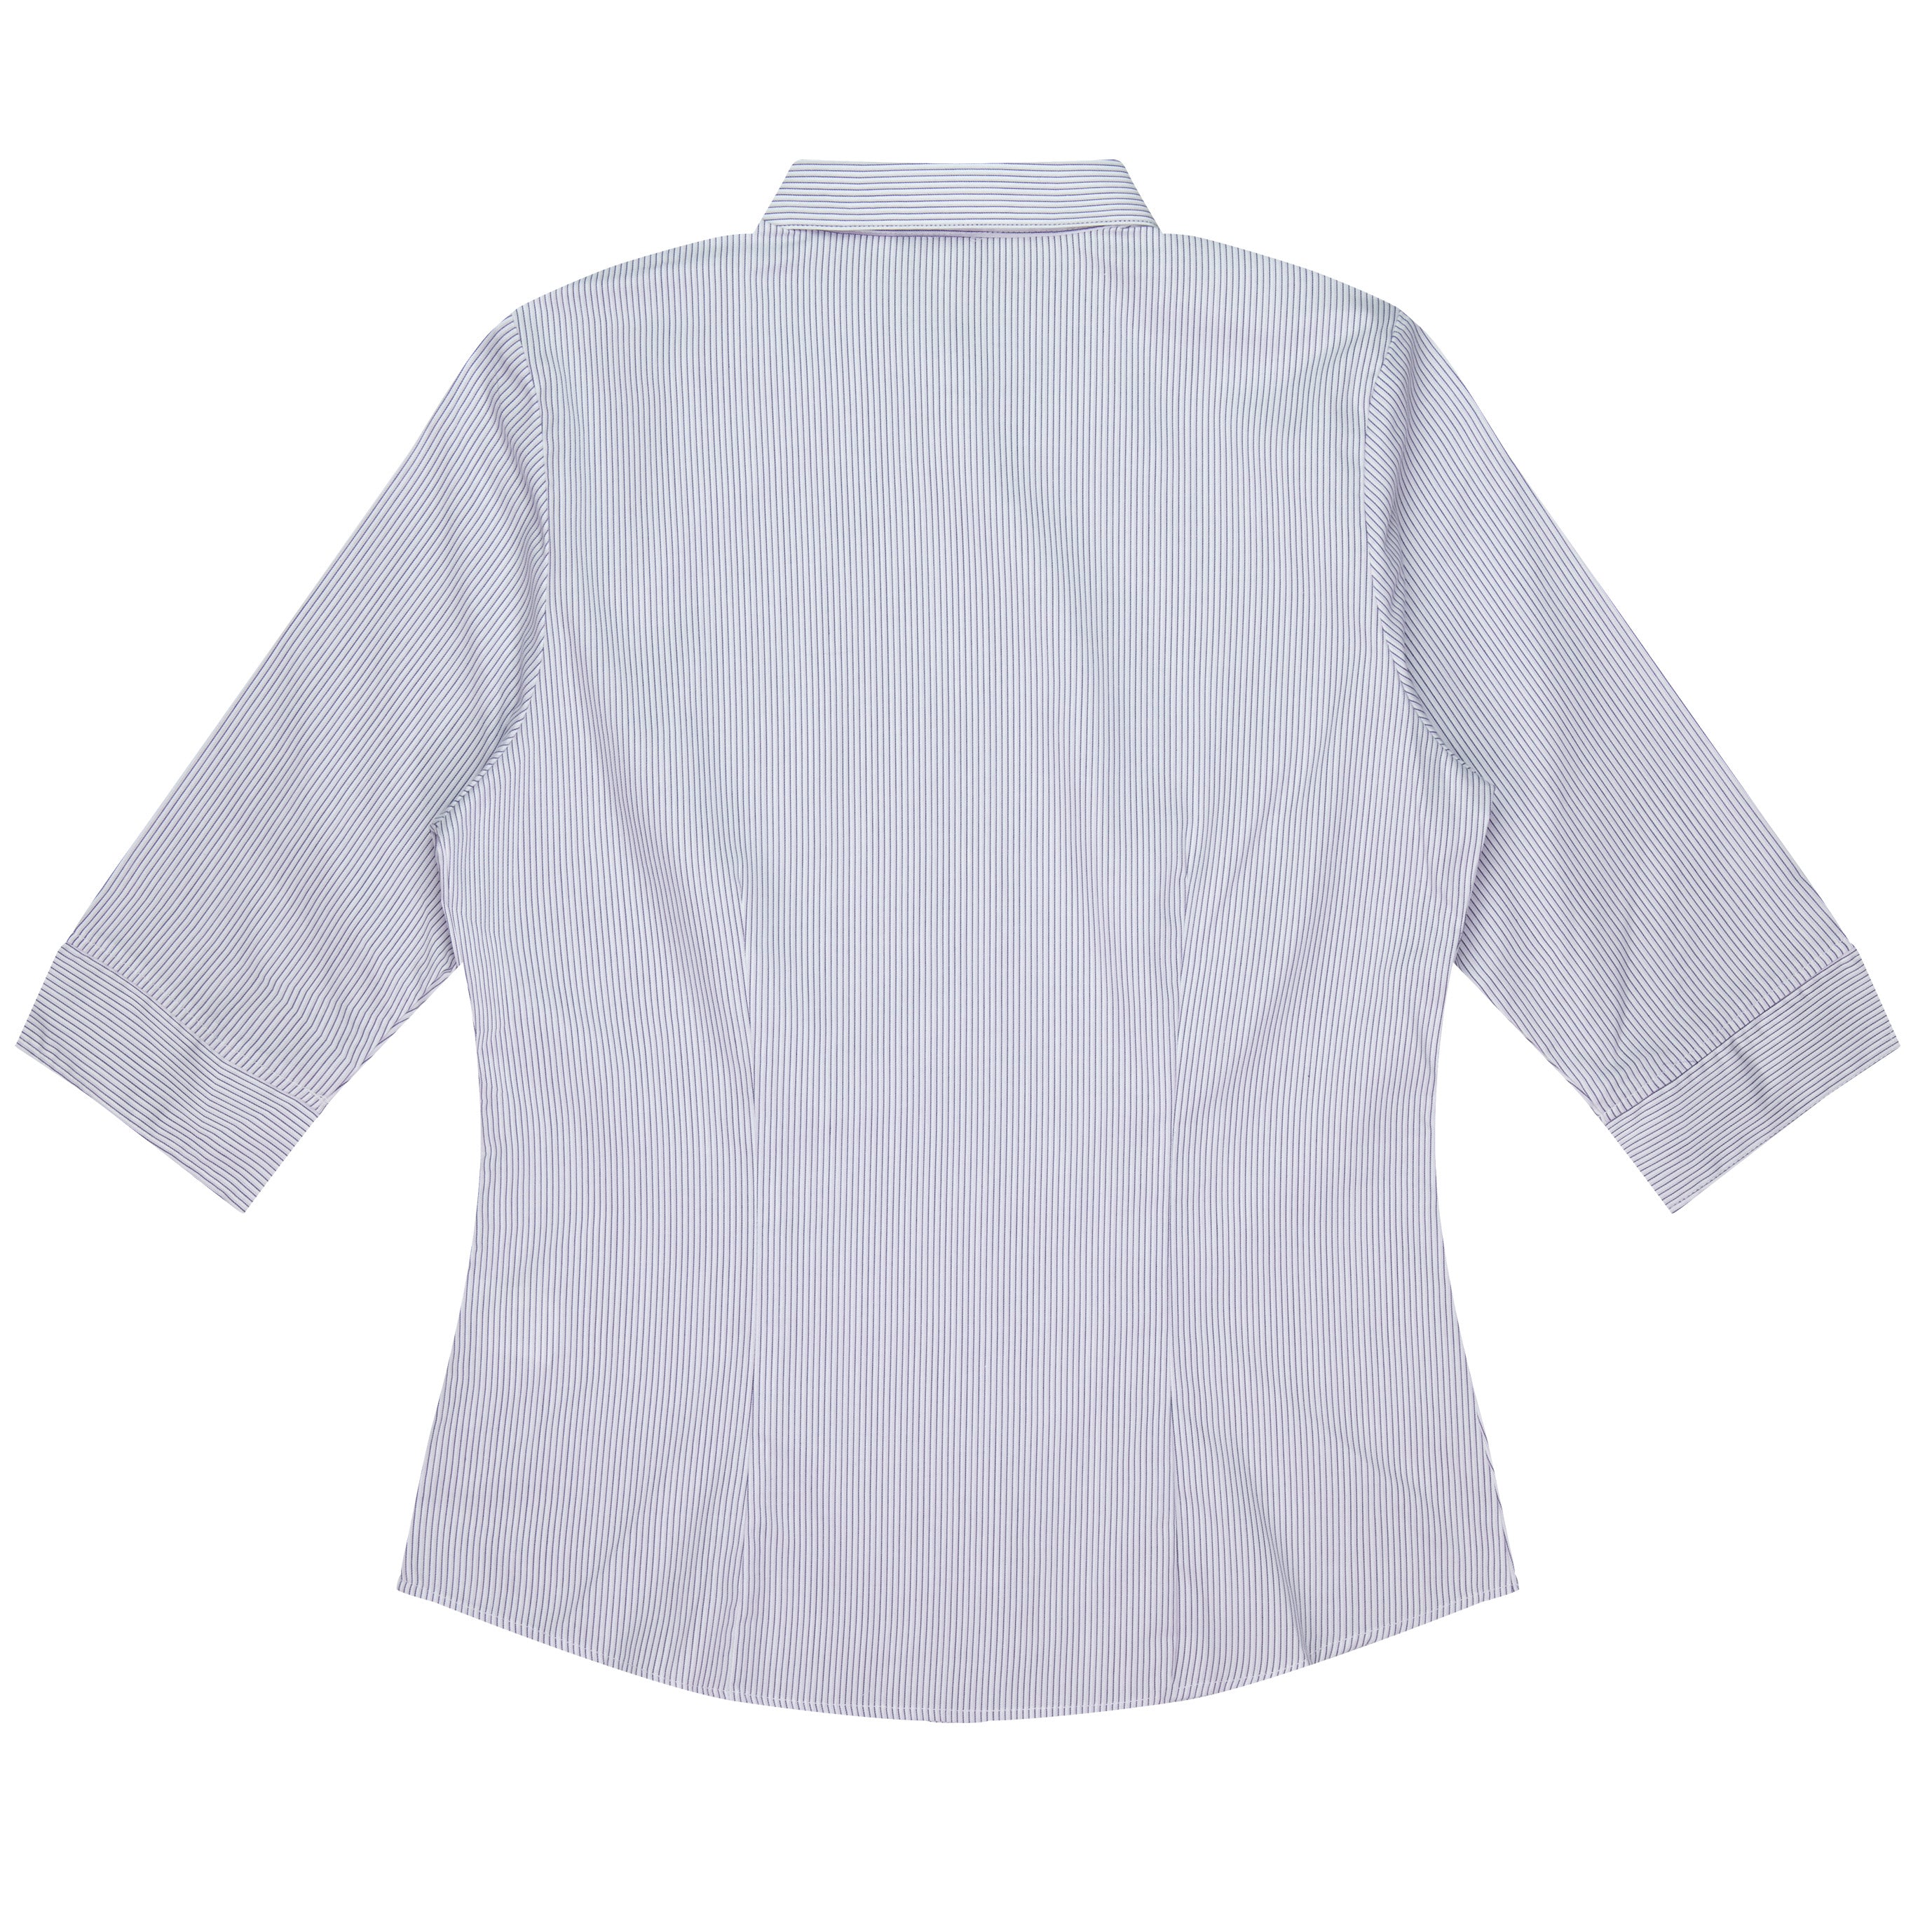 HENLEY LADY SHIRT 3/4 SLEEVE - 2900T-Aussie Pacific-1